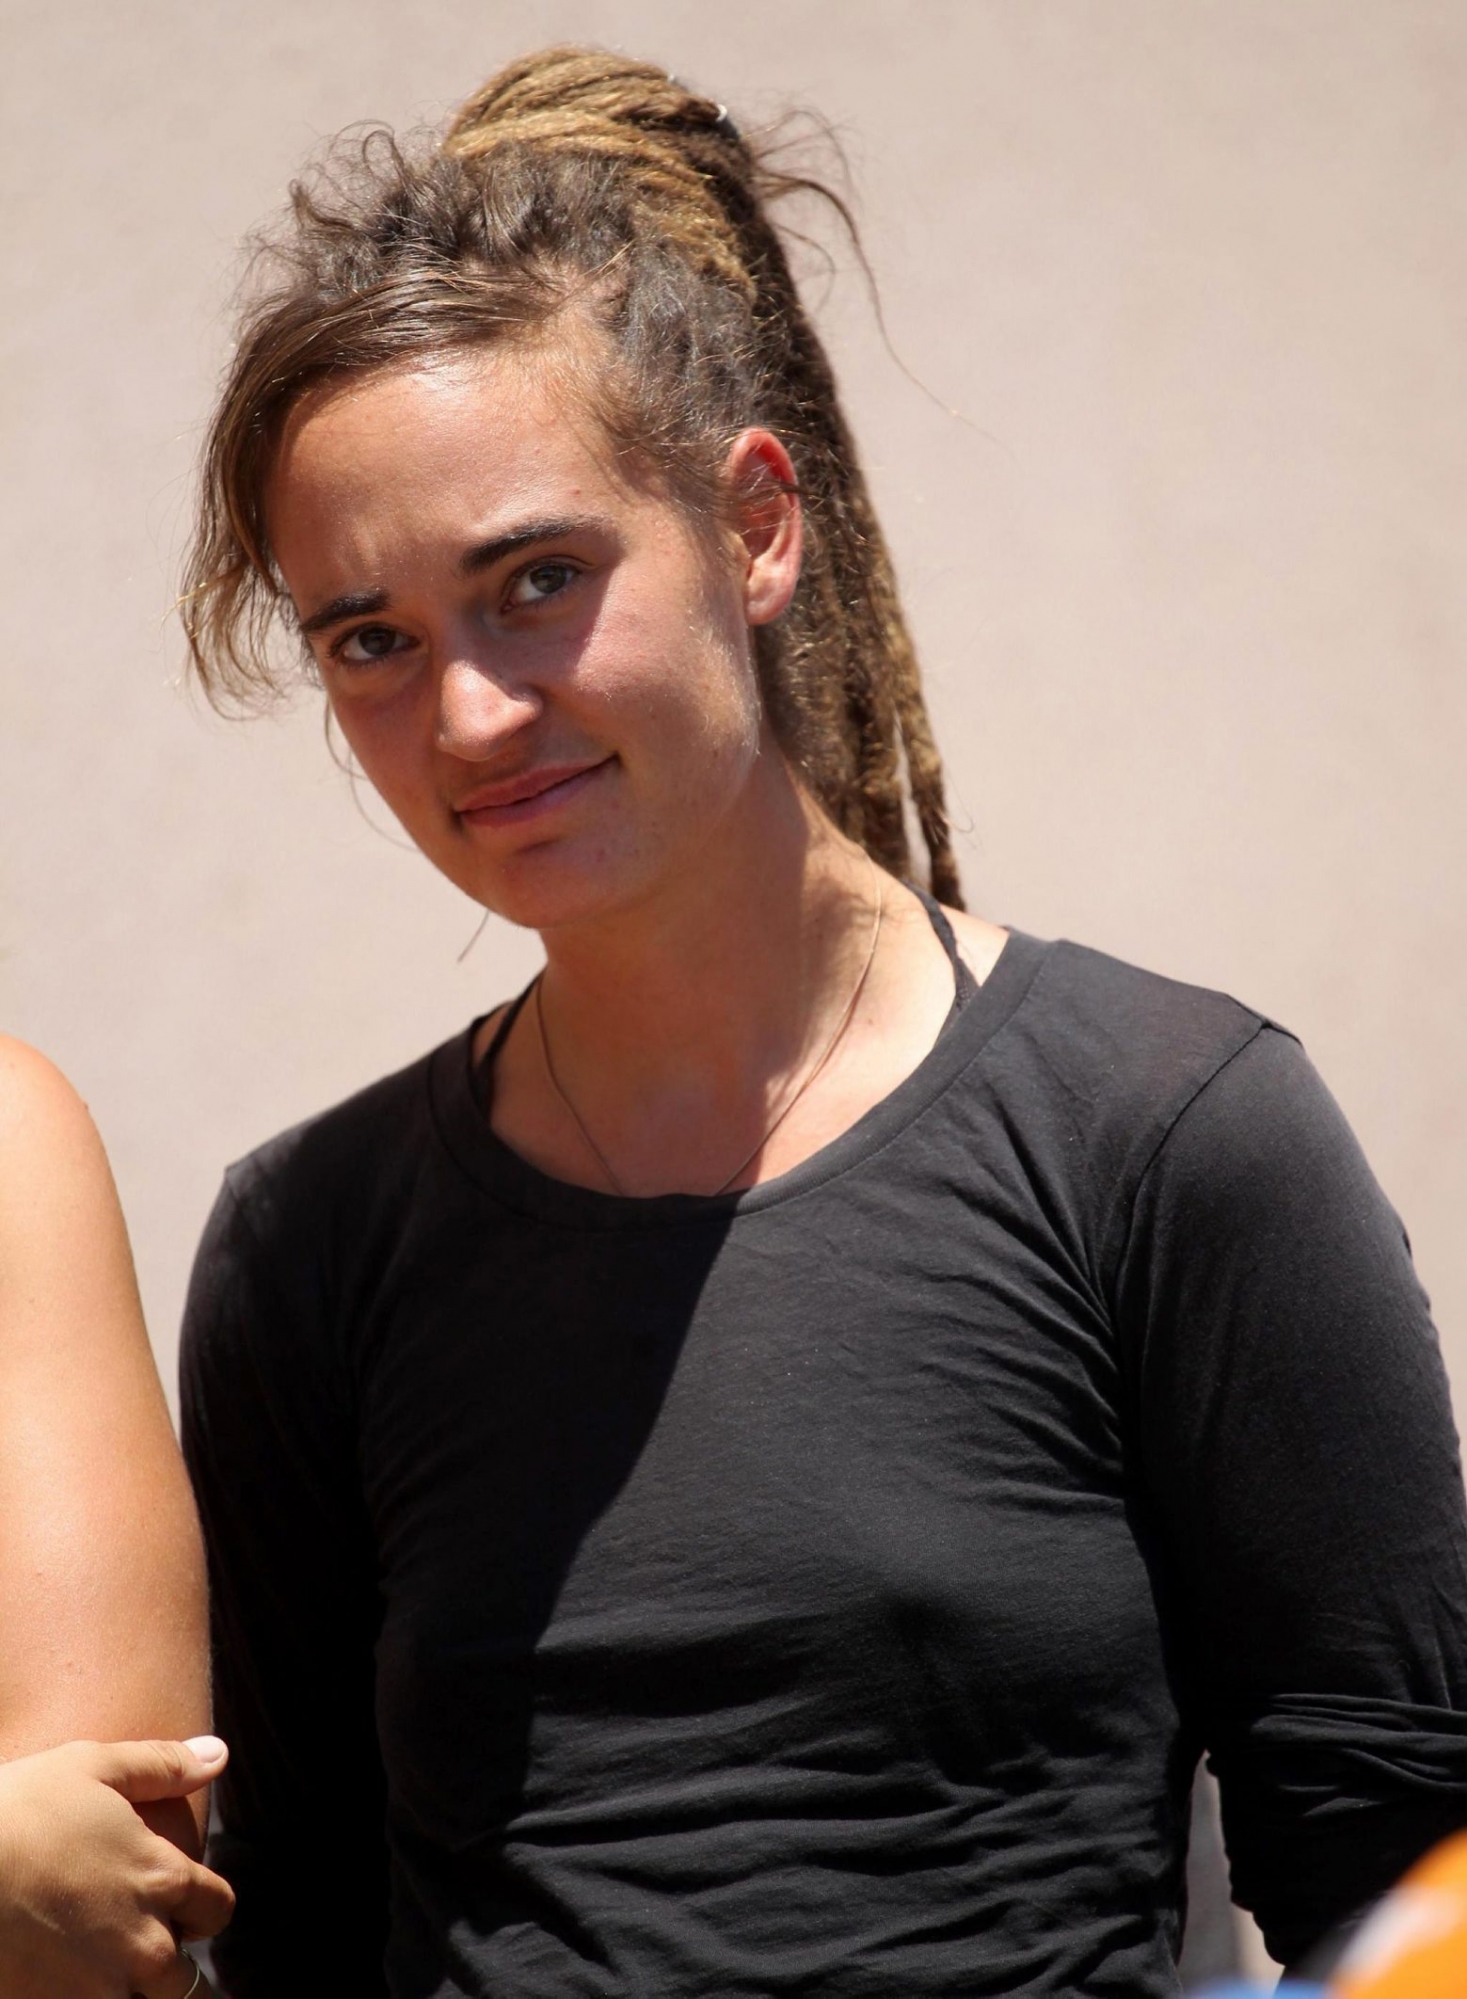 Sea-Watch3 German captain Carola Rackete leaves after being questioned in court in the southern Sicilian town of Agrigento, Italy, Thursday, July 18, 2019. Rackete, who forced a government block docking at an Italian port after rescuing migrants, faces questioning by Italian prosecutors over allegedly aiding illegal immigration. (Pasquale Claudio Montana Lampo/ANSA via AP) Italy SeaWatch Questioning